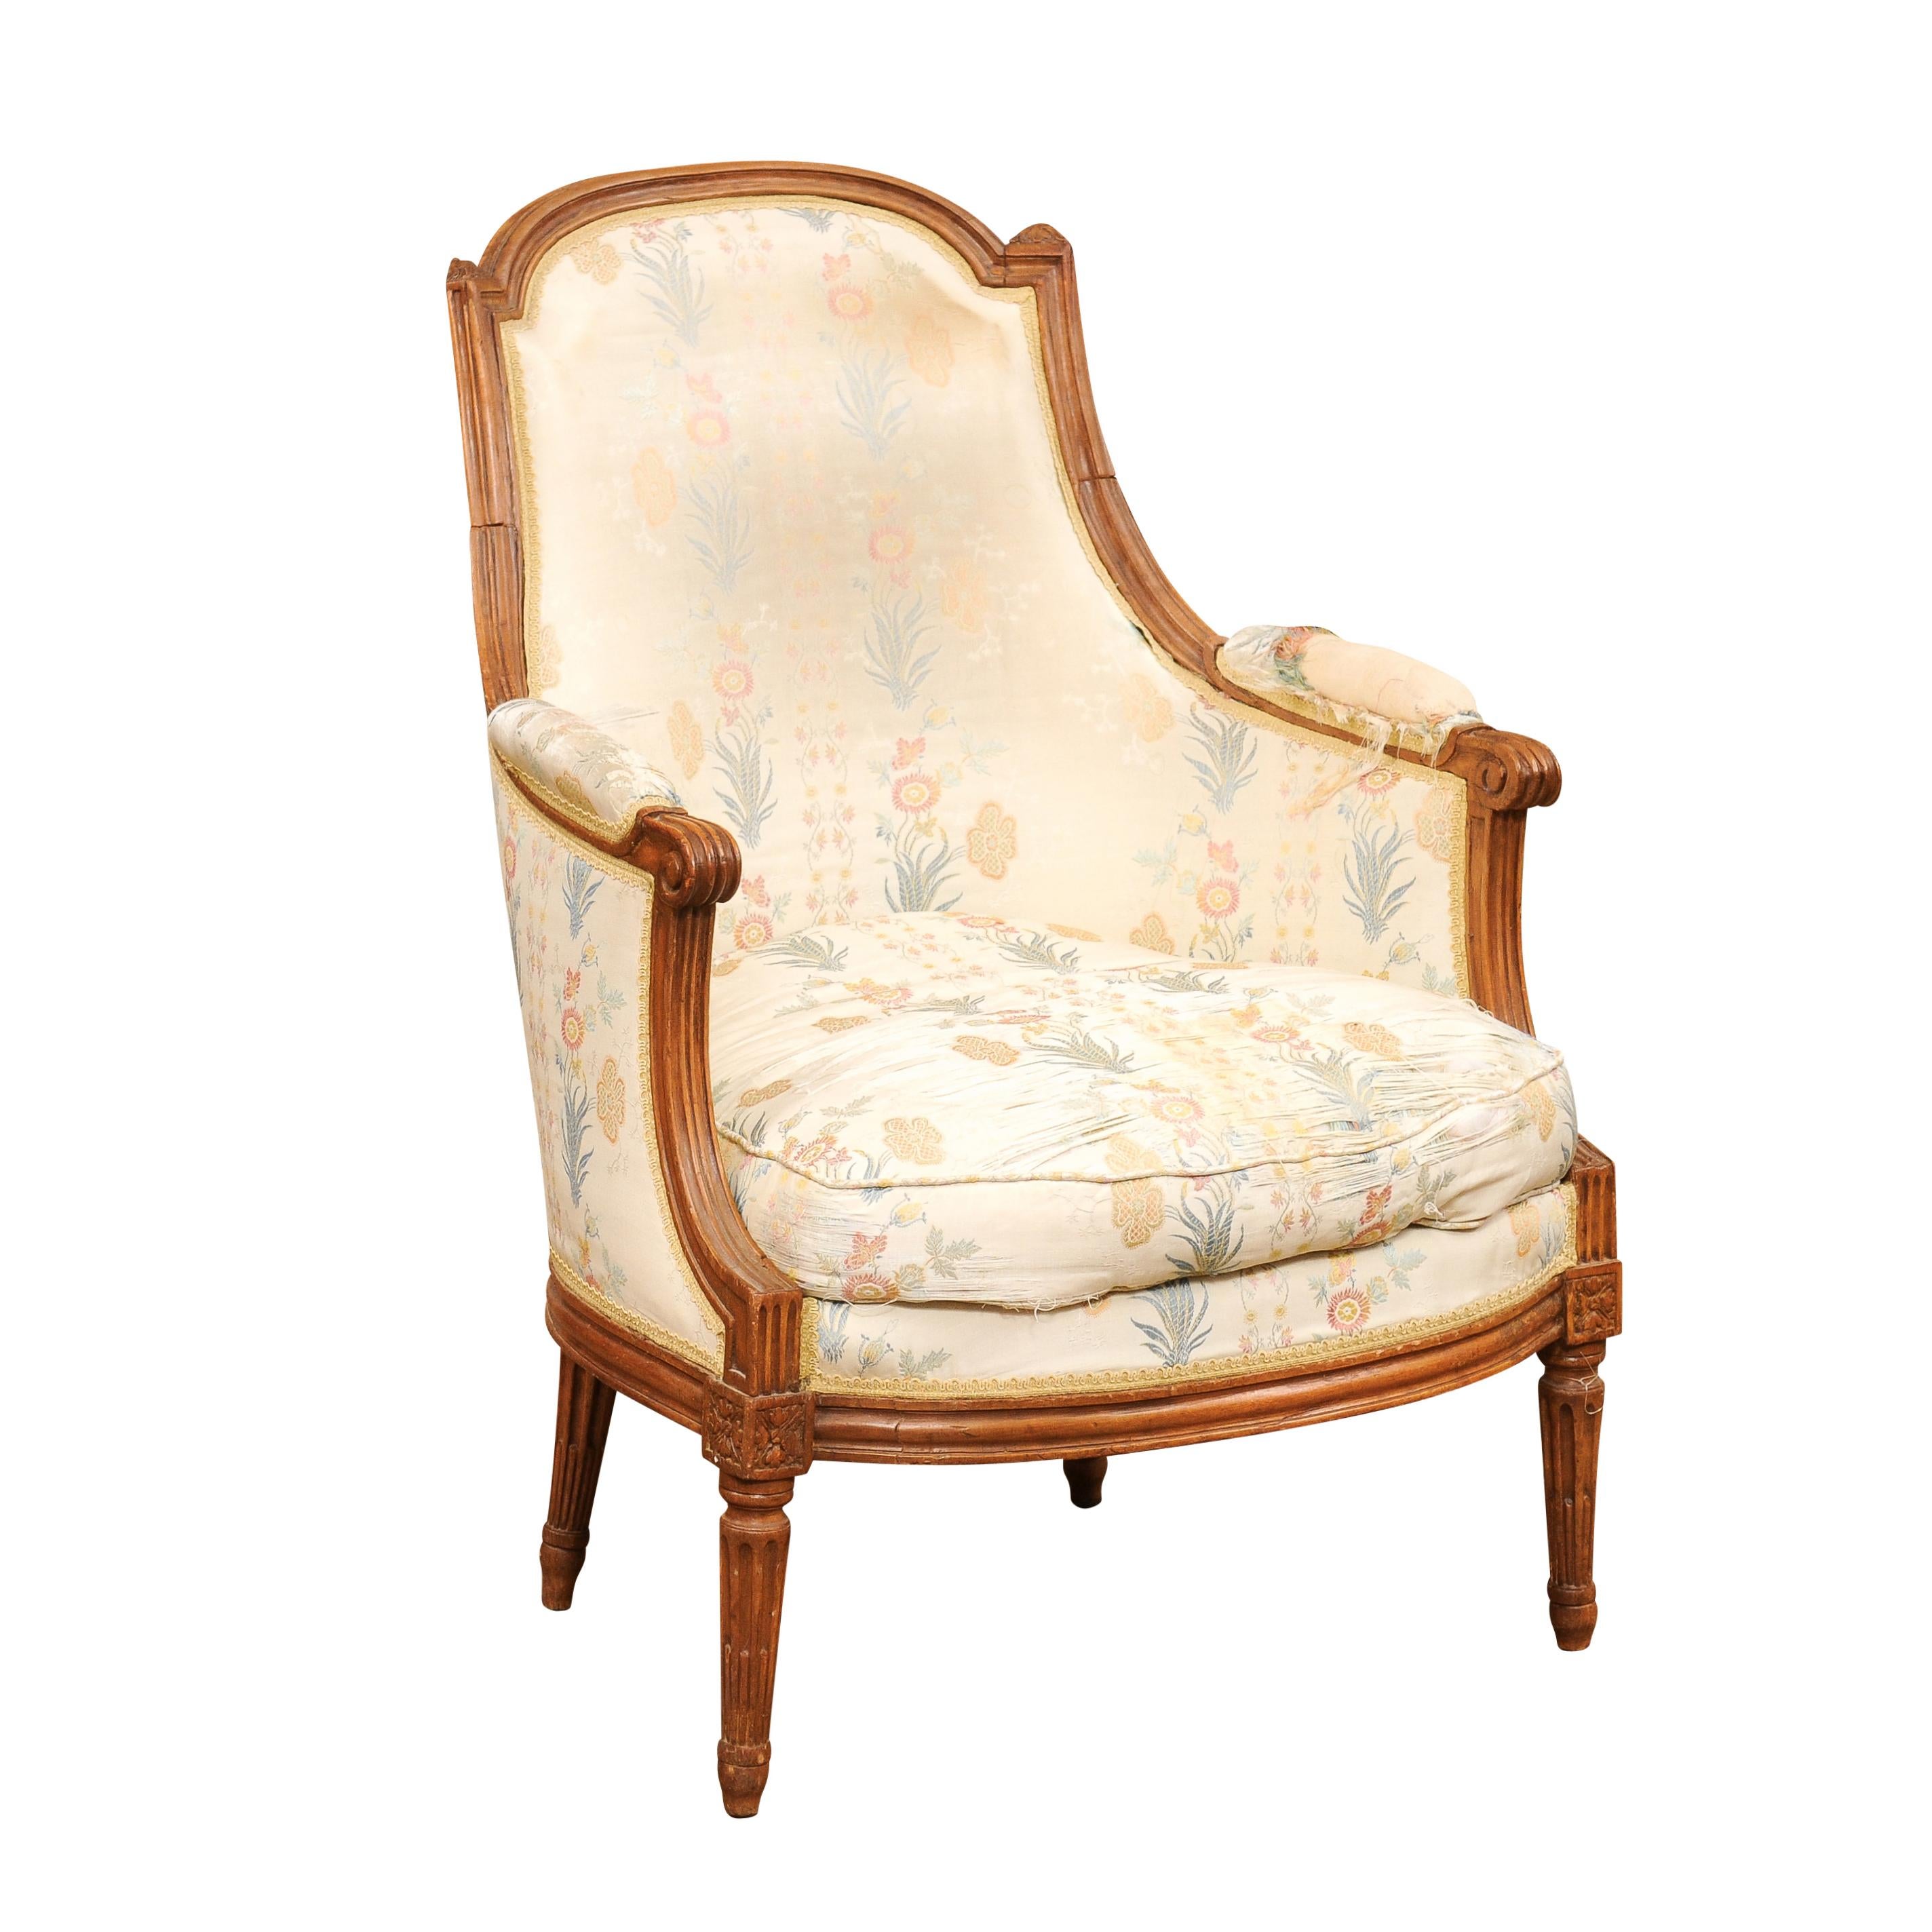 A French Louis XVI period walnut bergère chair from the late 18th century with curving back, scrolling arms, carved rosettes and fluted tapering legs. Experience the timeless elegance of this French Louis XVI period walnut bergère chair from the